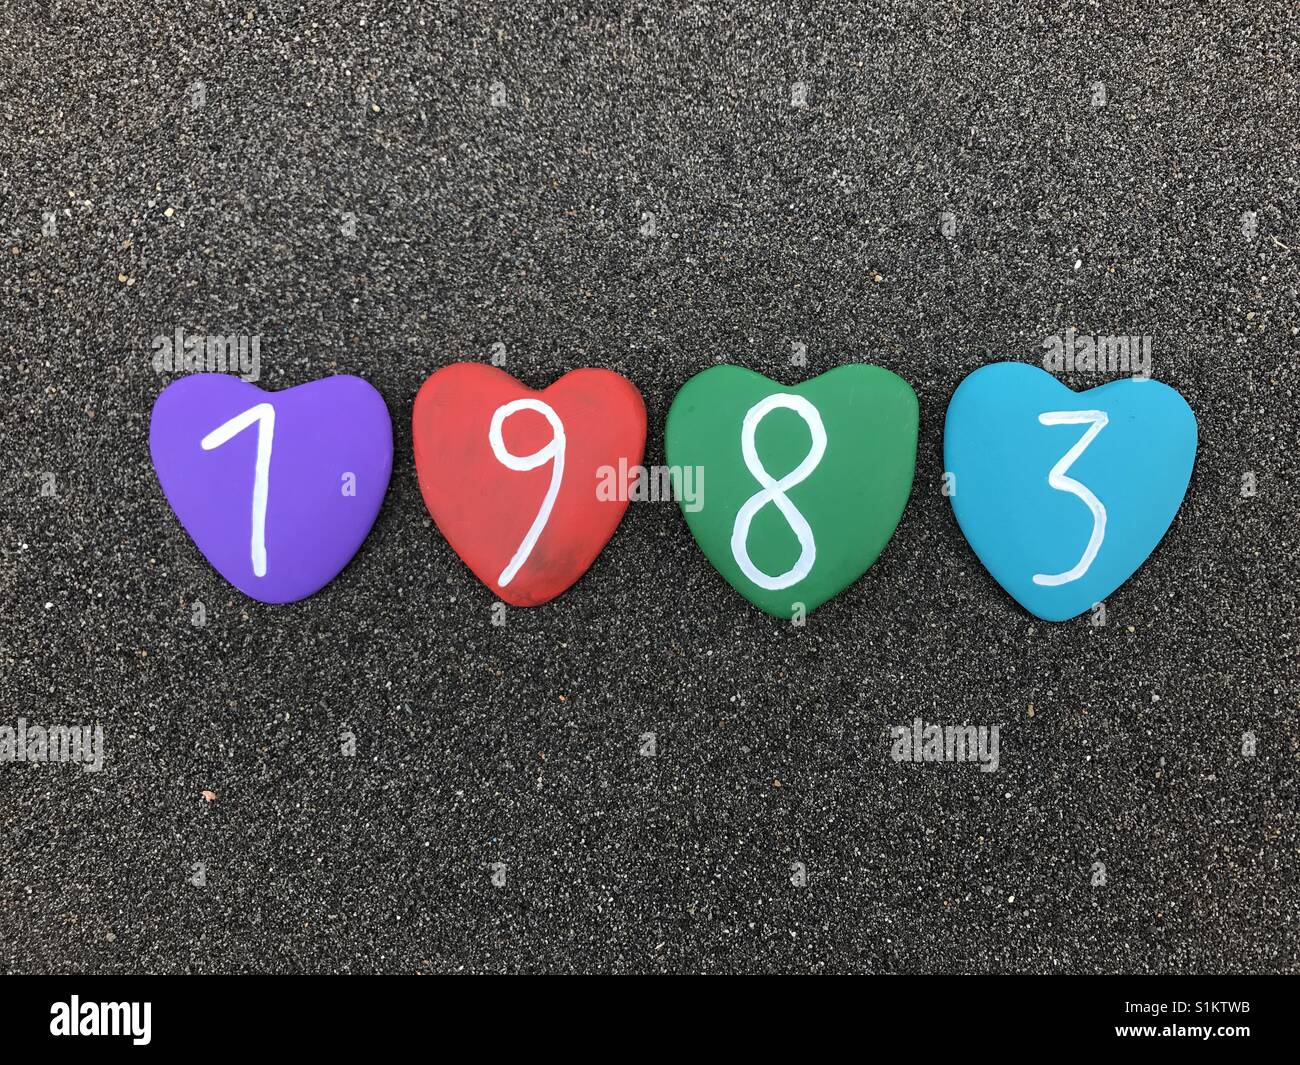 1983 year with colored heart stones over black volcanic sand Stock Photo